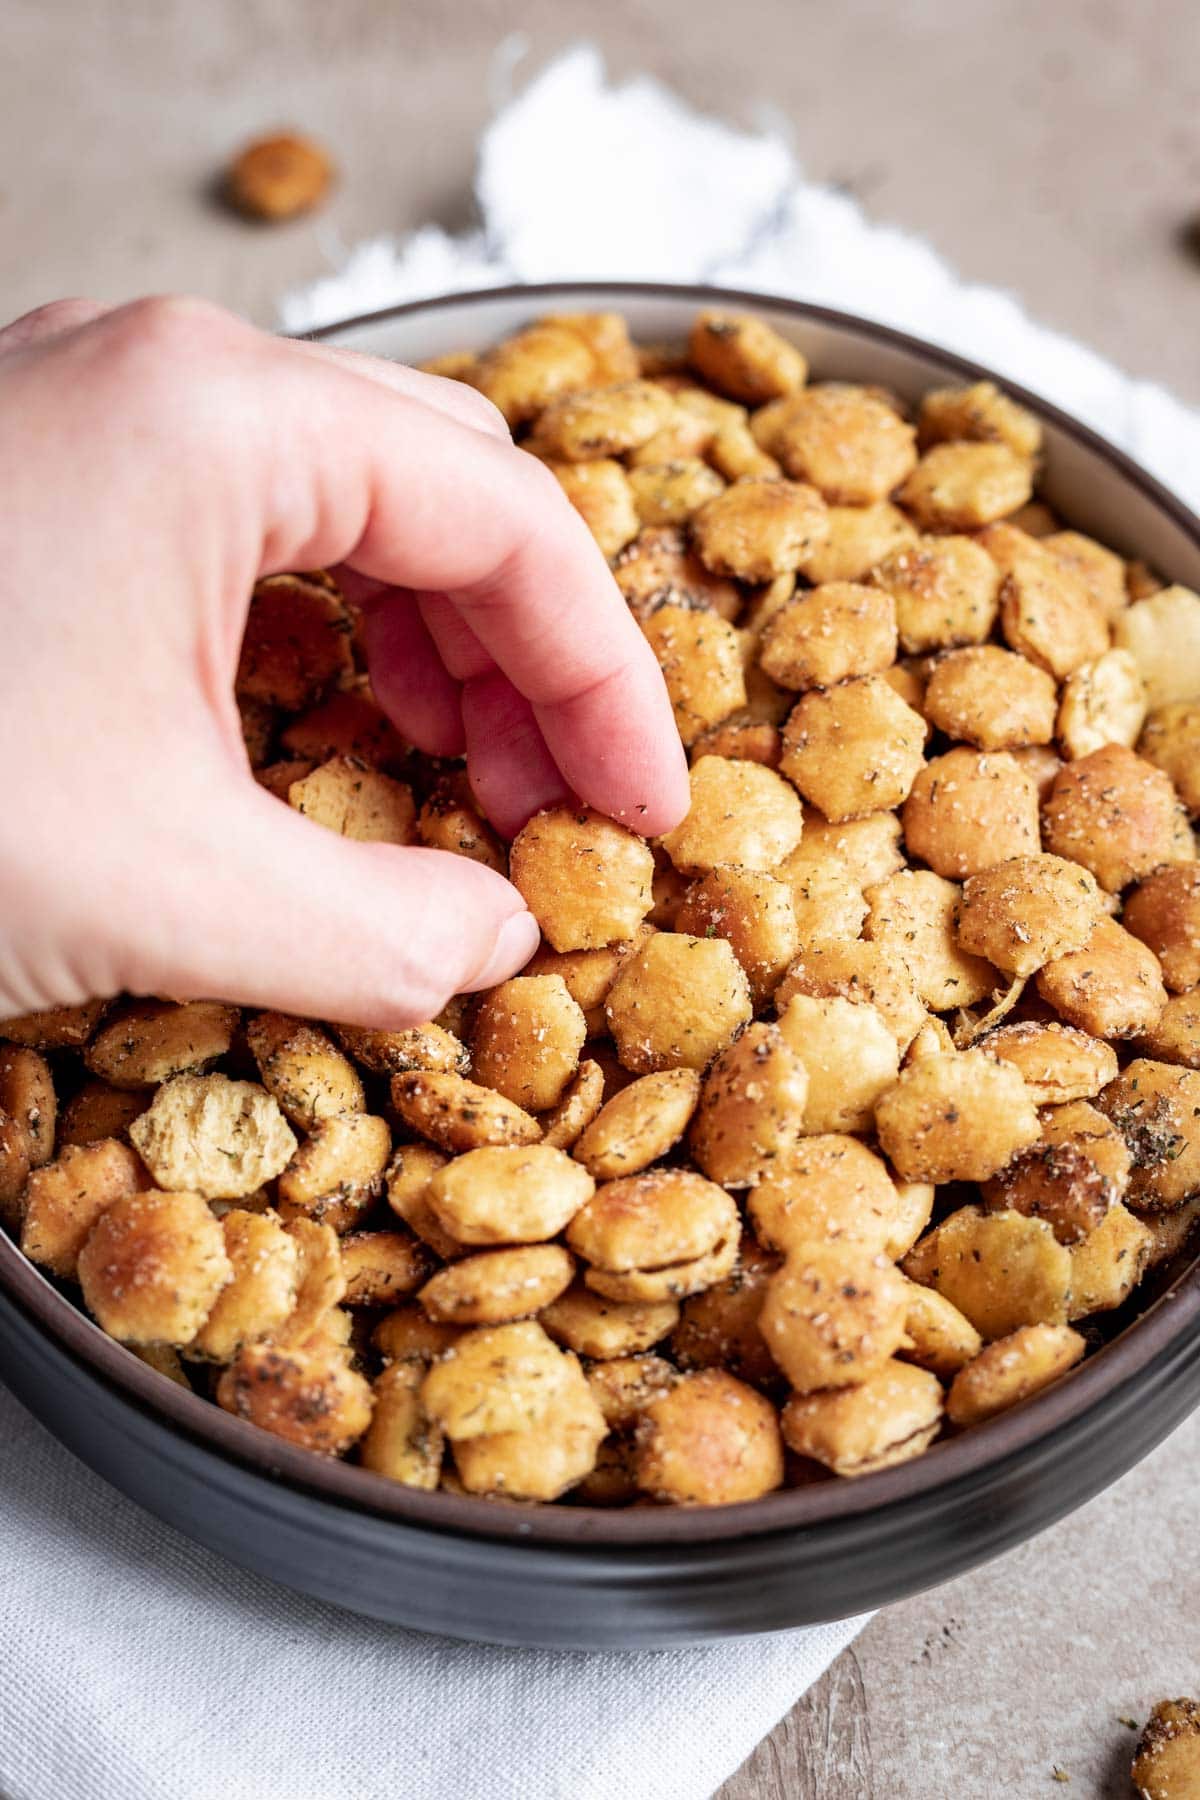 Ranch Oyster Crackers seasoned and baked in a large bowl and hand grabbing a portion